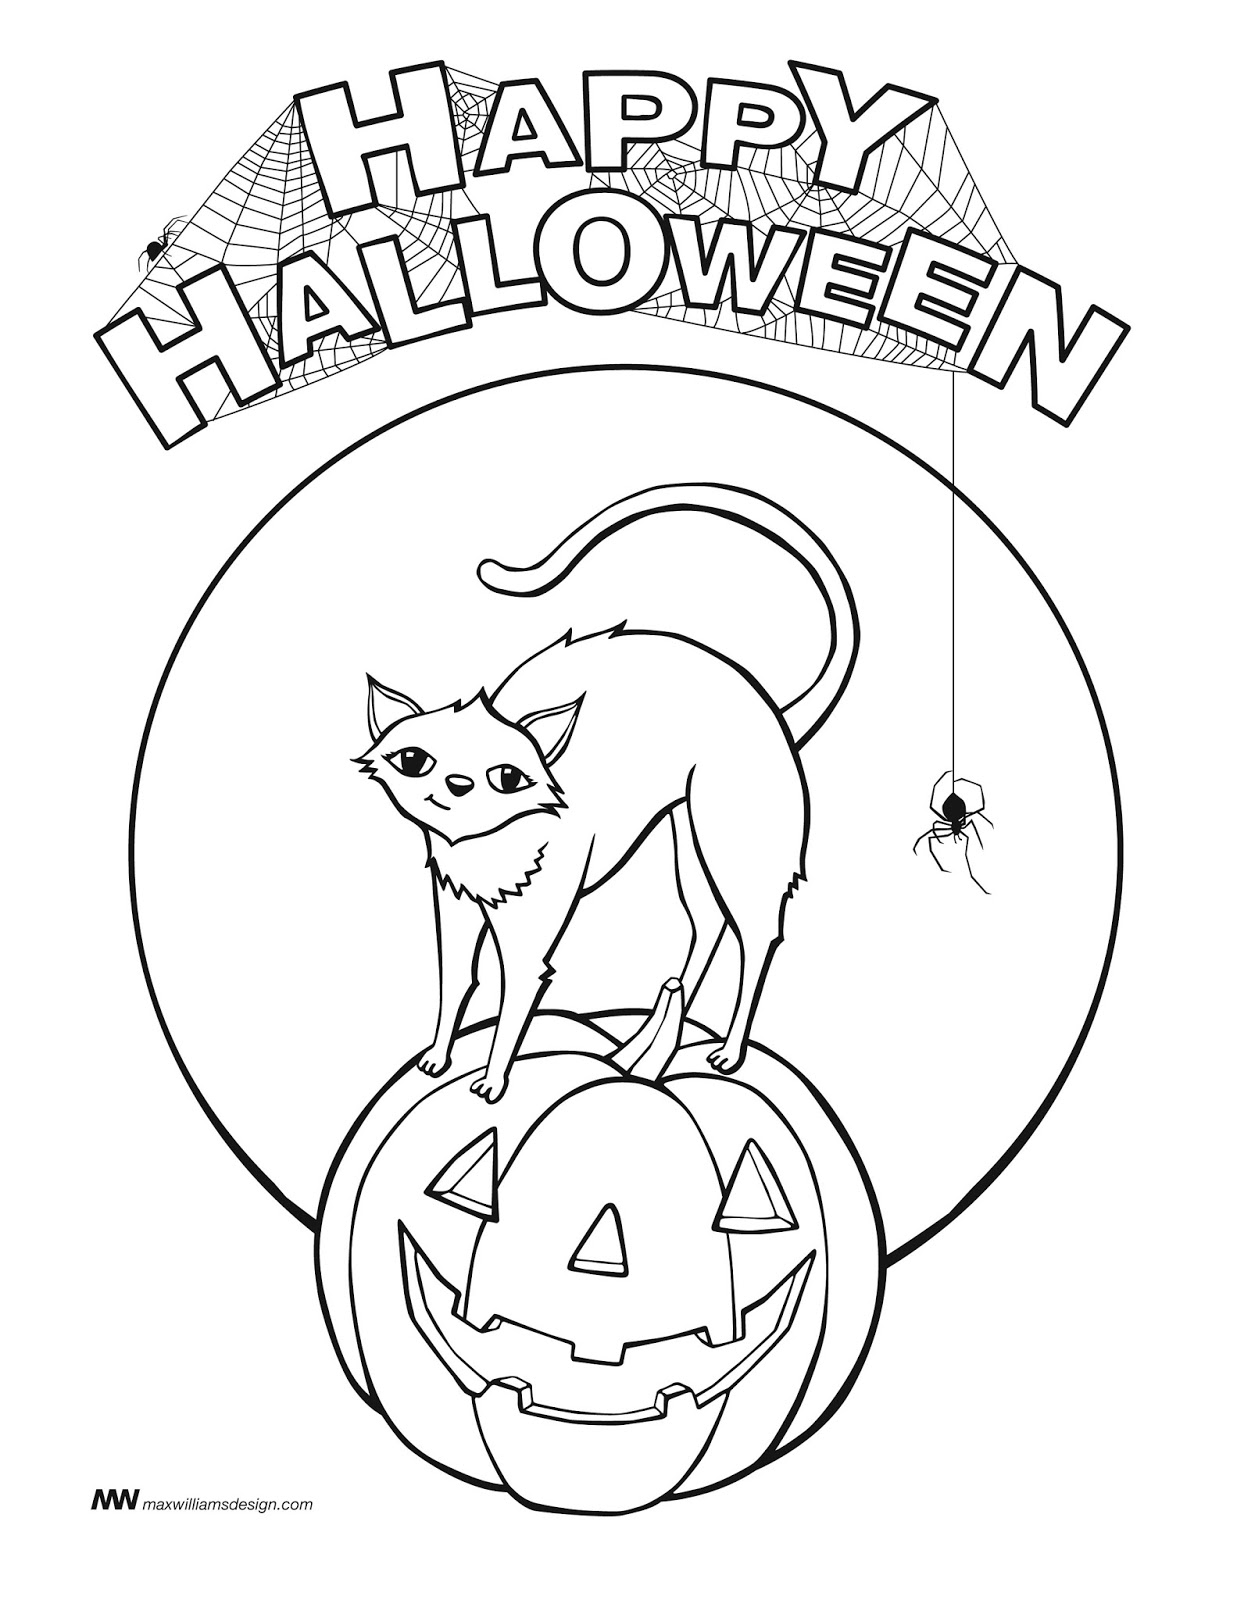 free-happy-halloween-coloring-pages-template-for-print-kids-and-adults